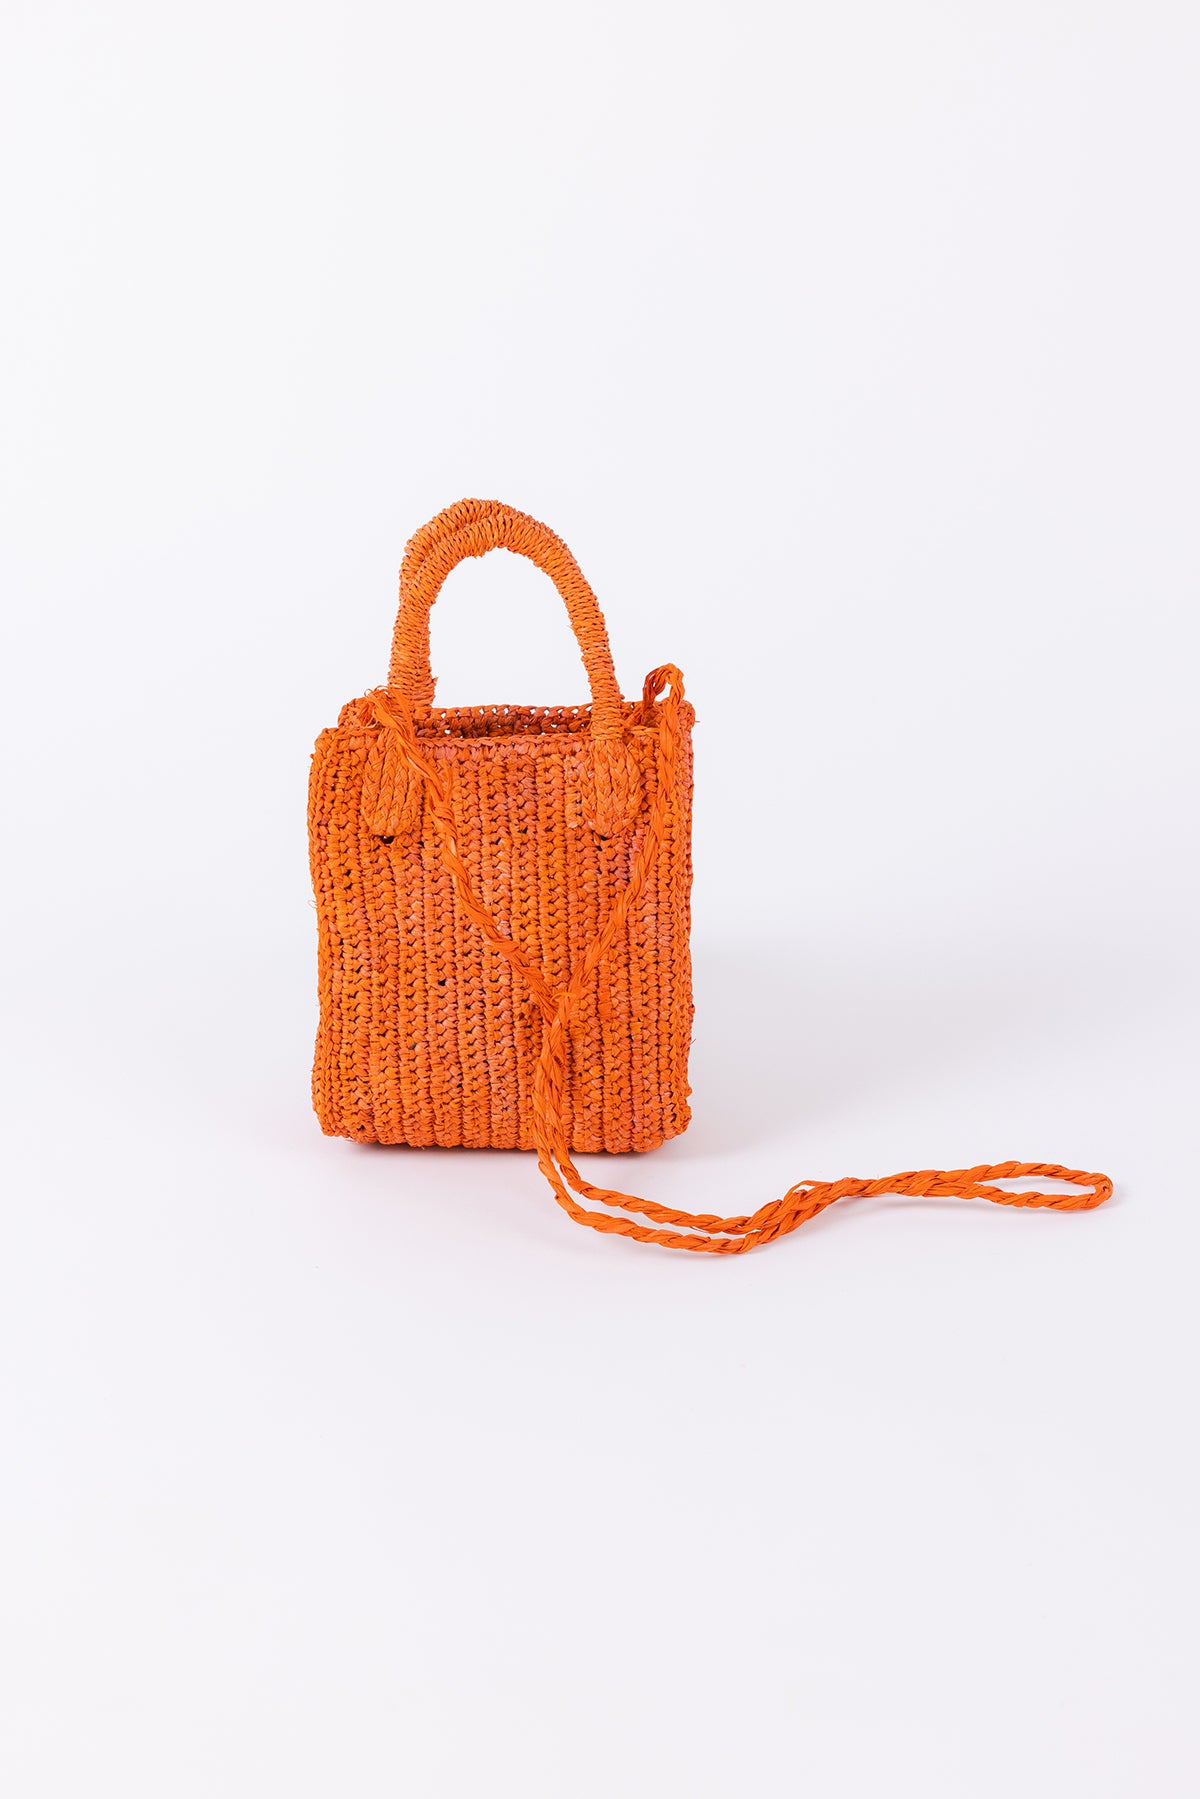 MIMI RAFFIA CROSSBODY handbag with a strap on a white background, featuring vibrant colors by Velvet by Graham & Spencer.-26047808045249